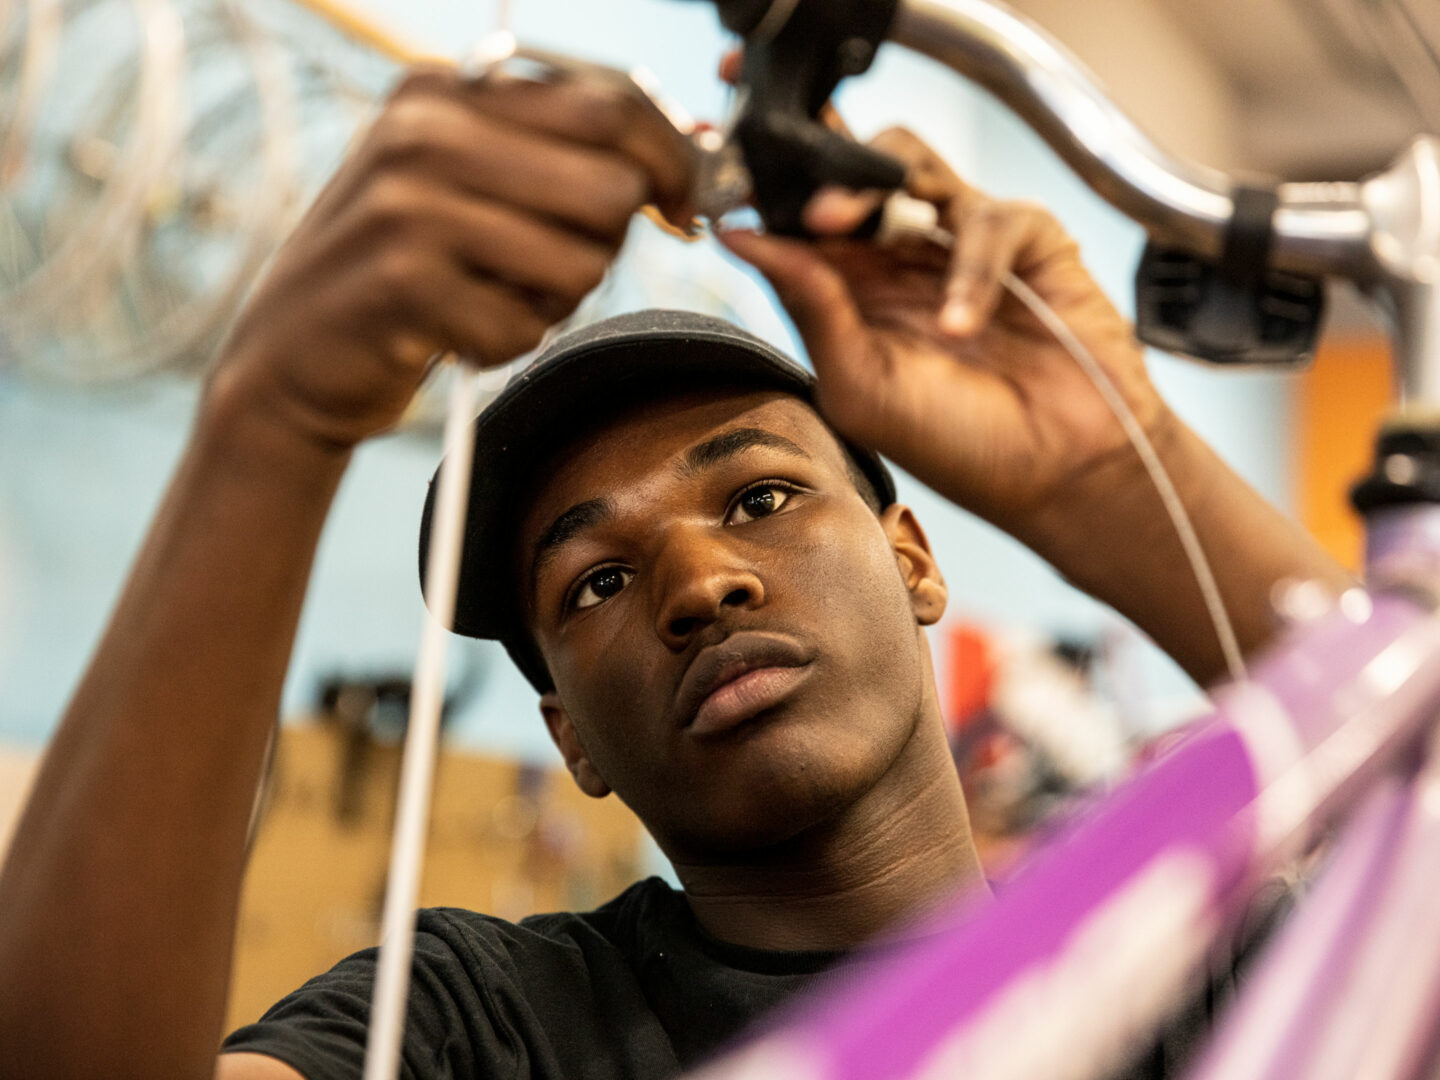 A young man looks focused while working on a bike.